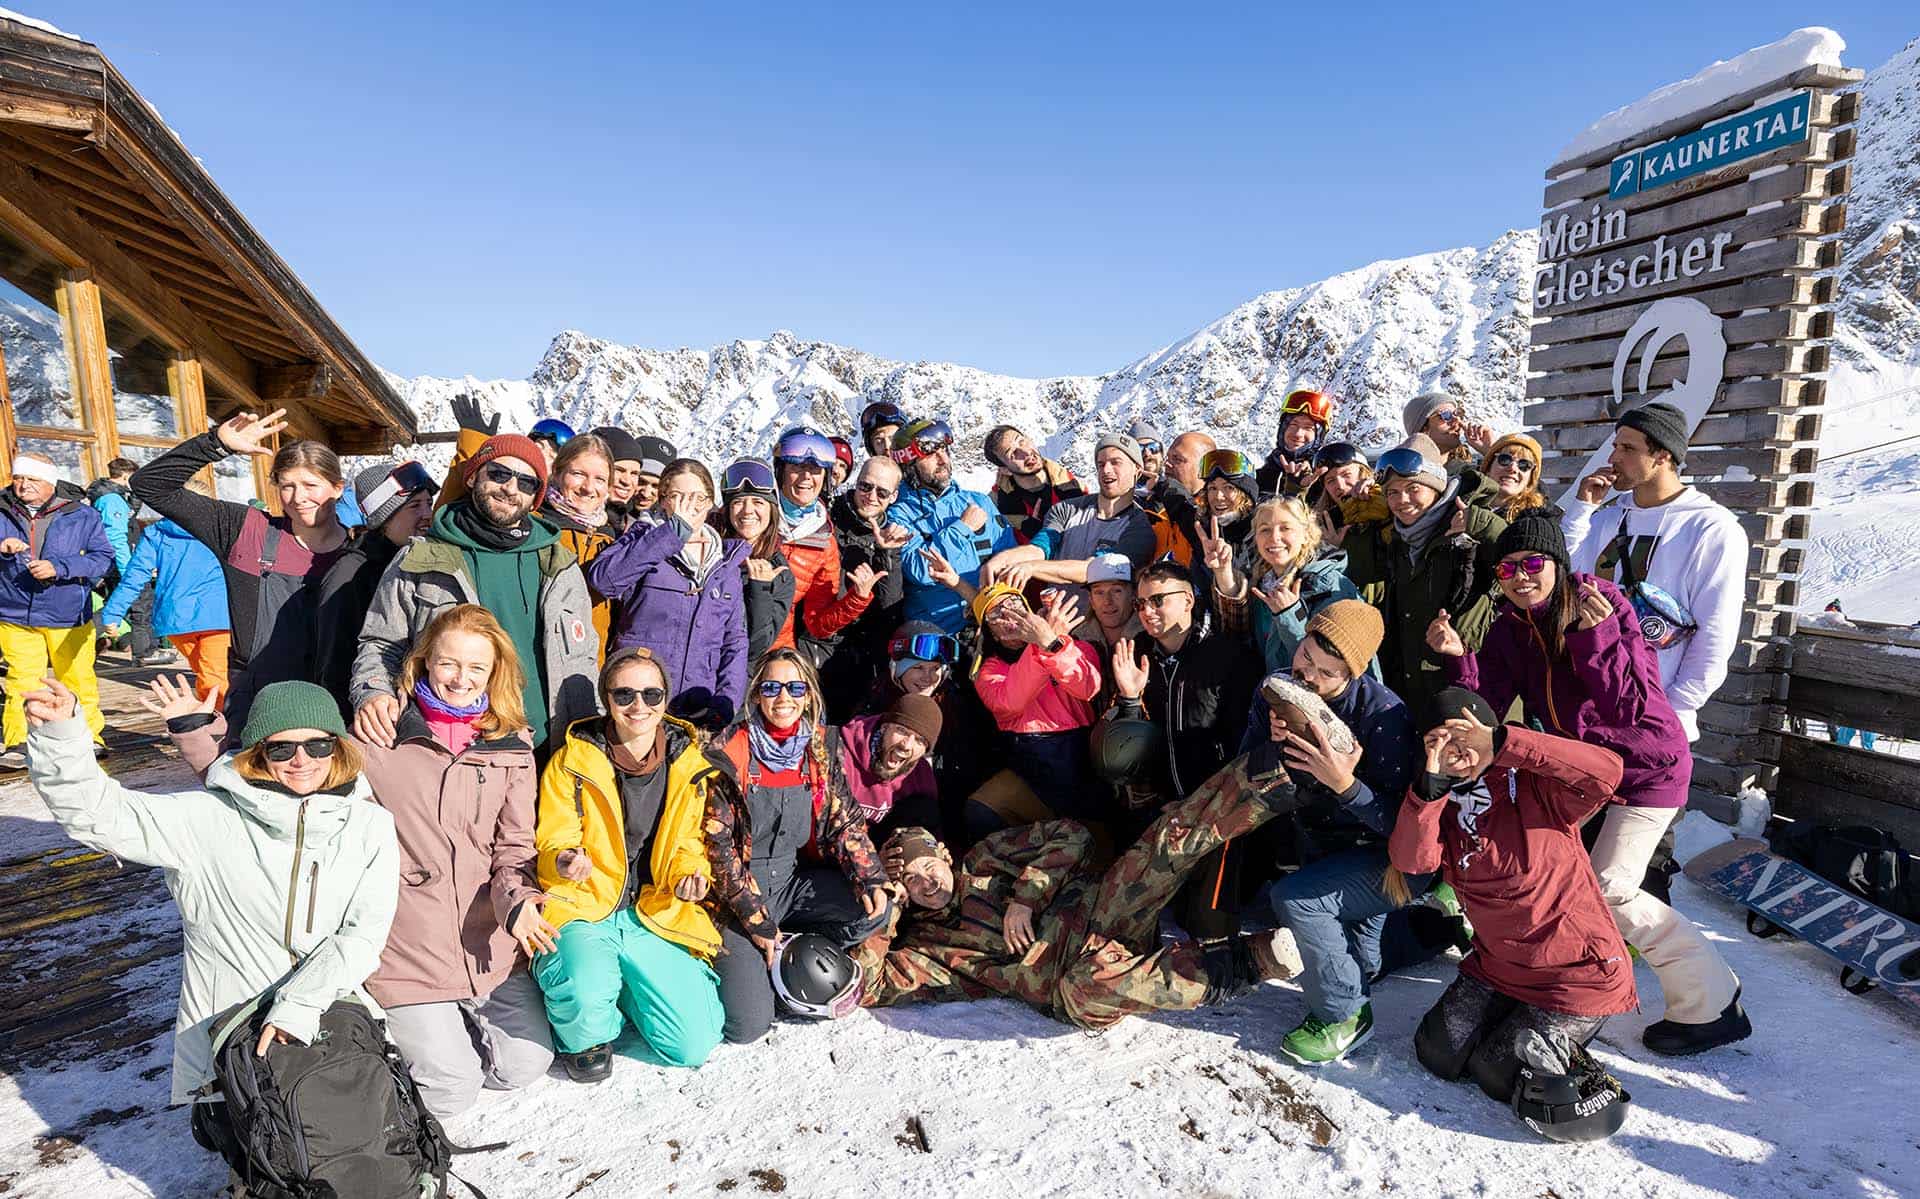 Snowboarders and Skiers for Christ group photo at Kaunertal for the European Season Opener